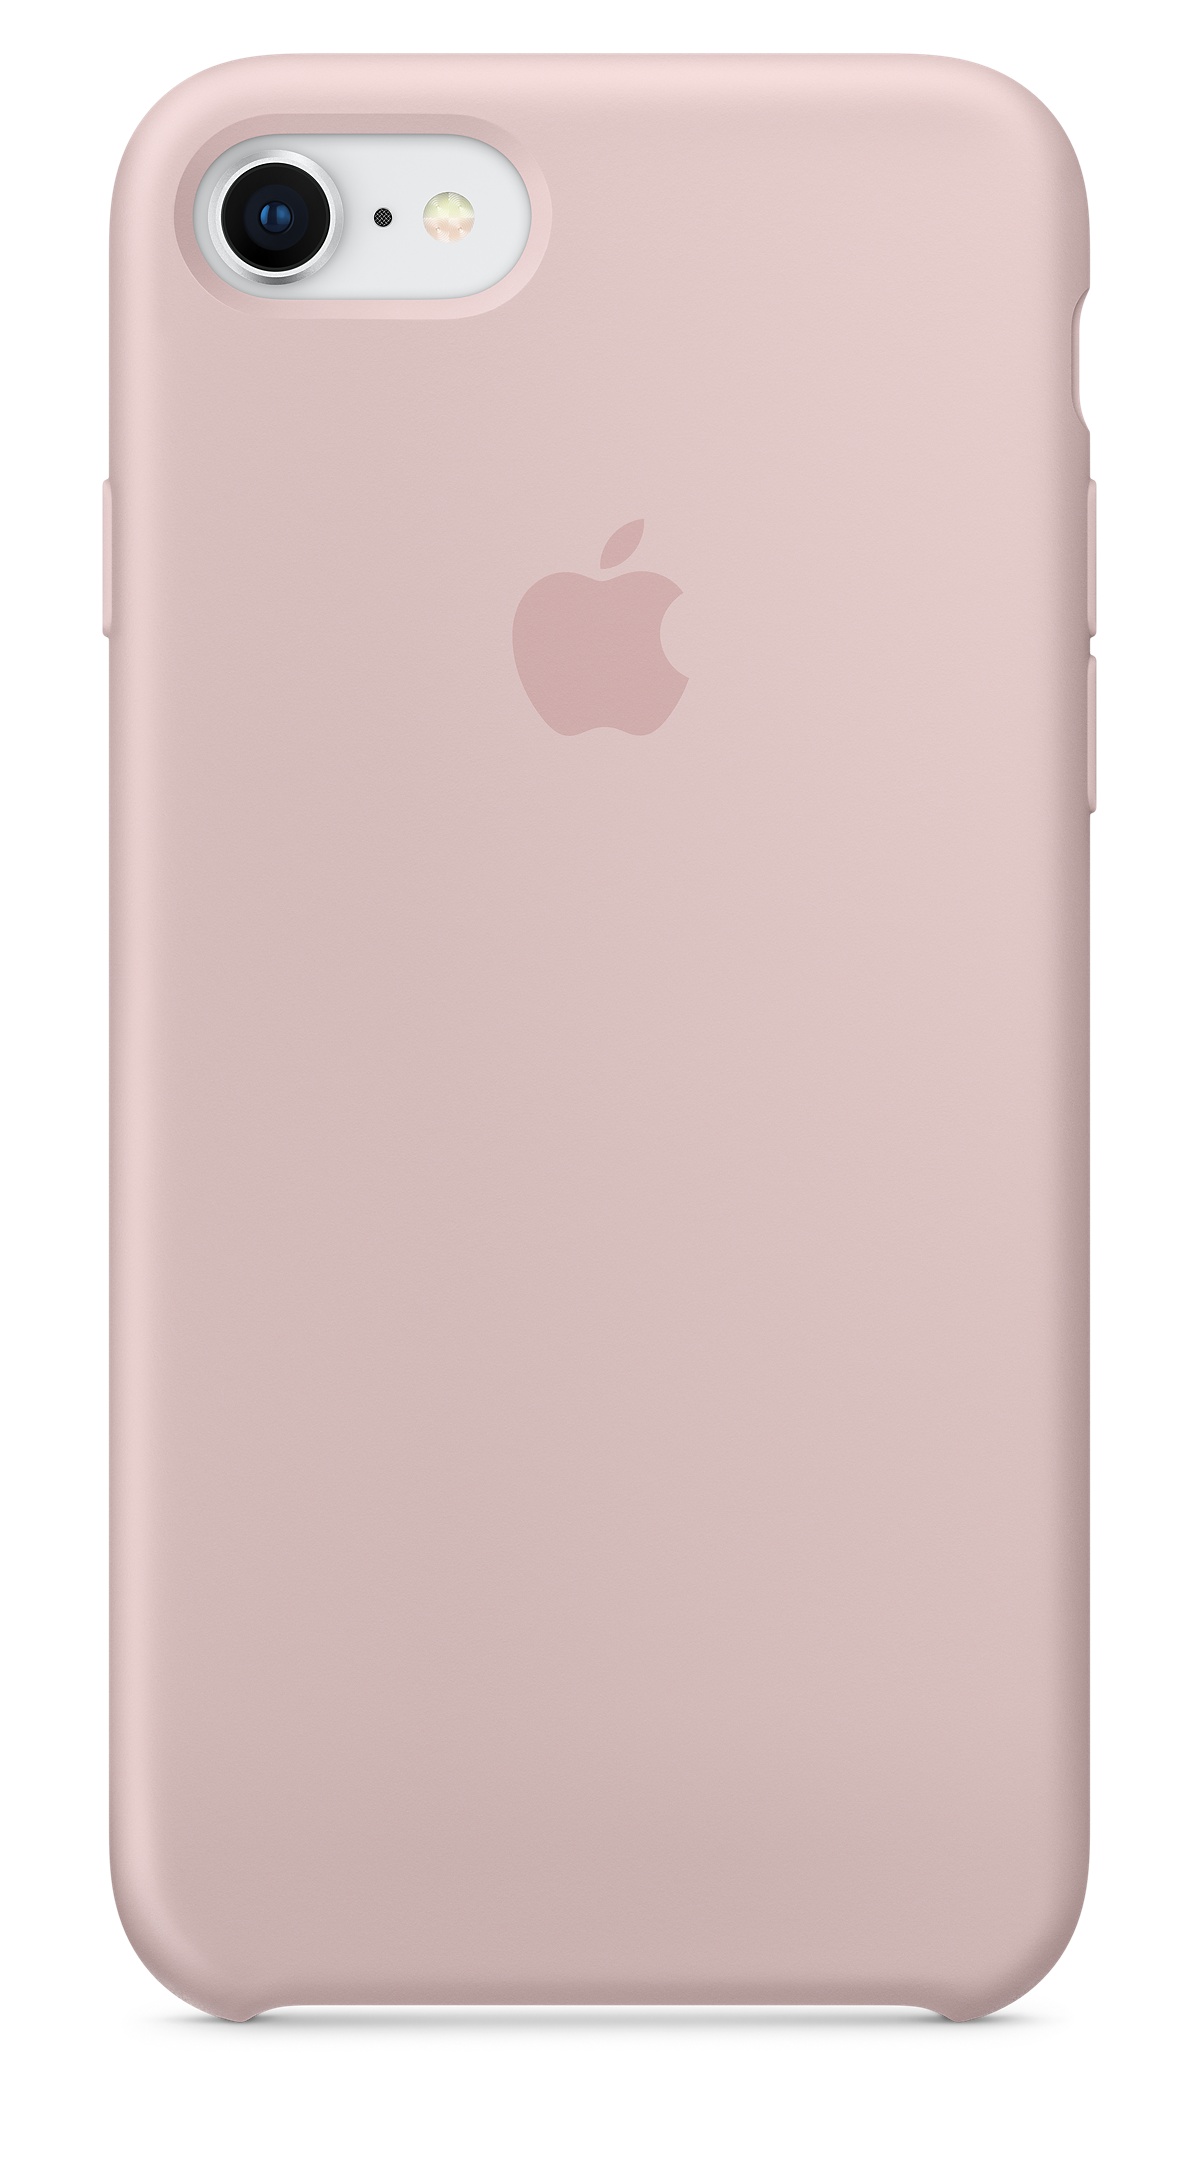 iPhone 8 / 7 Silicone Case - Pink Sand - Apple